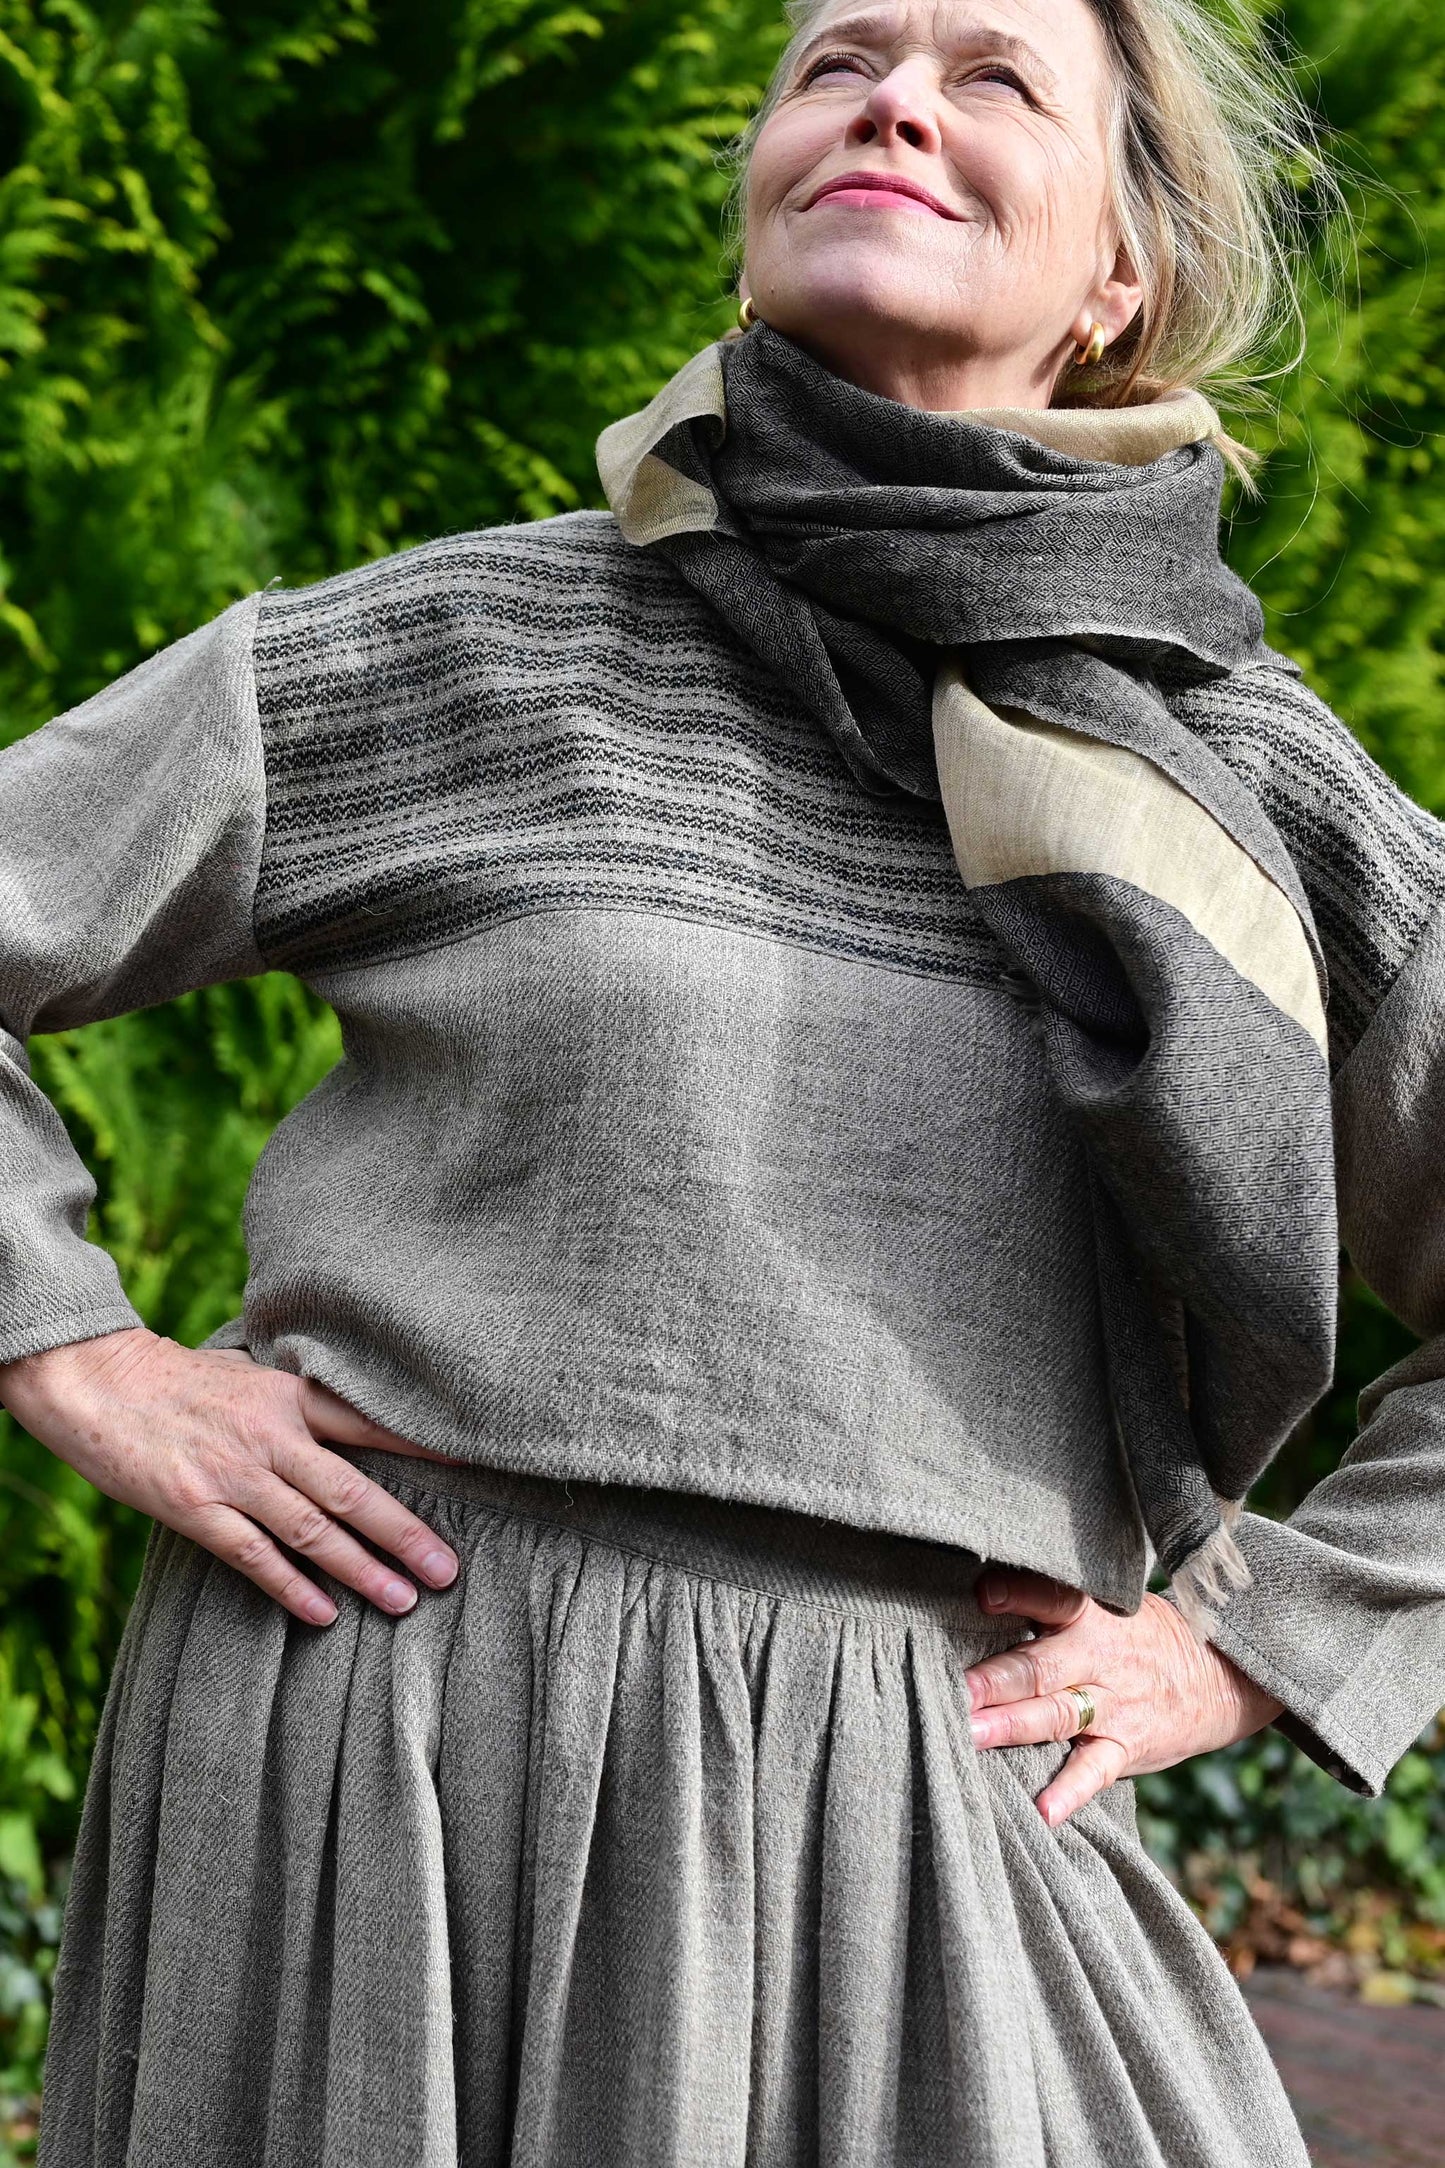 Creative front closeup of a middle aged female model wearing a handspun handwoven khadi full sleeved crop top for ladies in natural brown wool with black details.